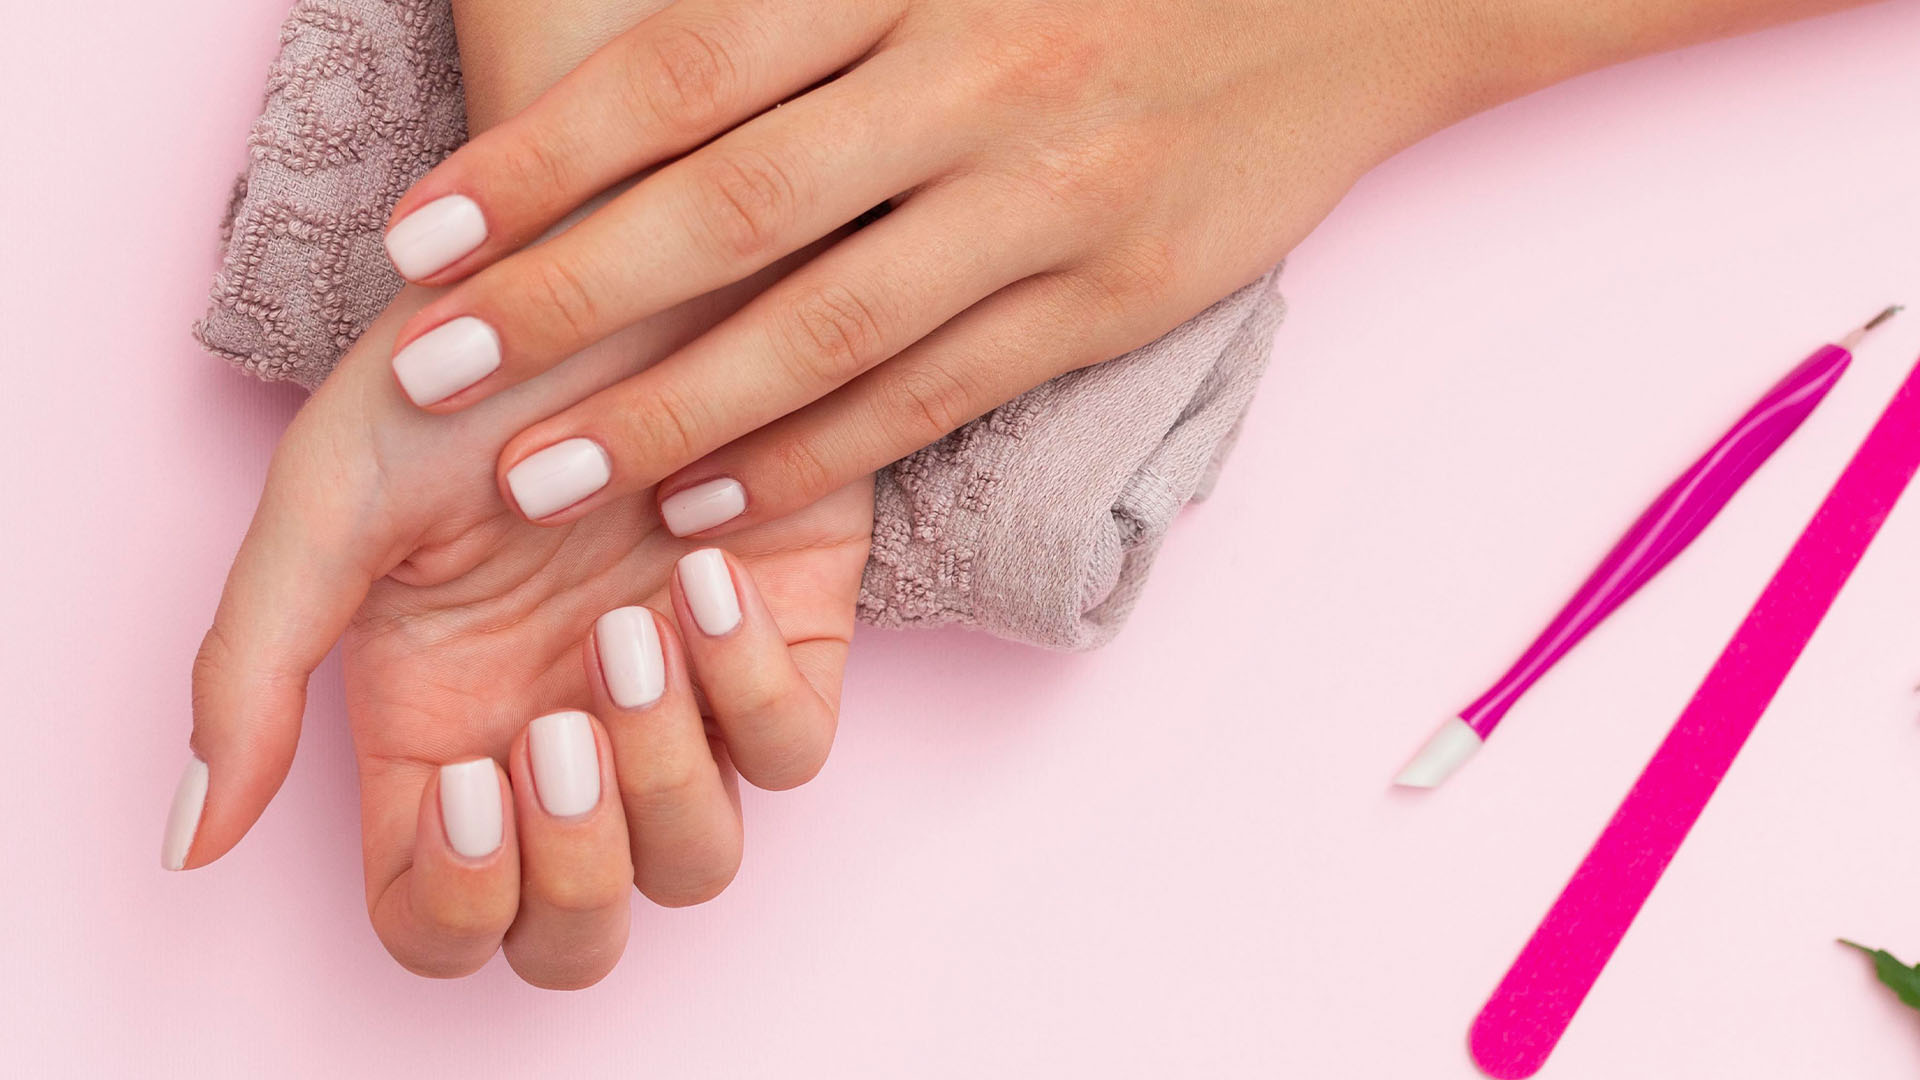 Clinical Trials For Nail Products